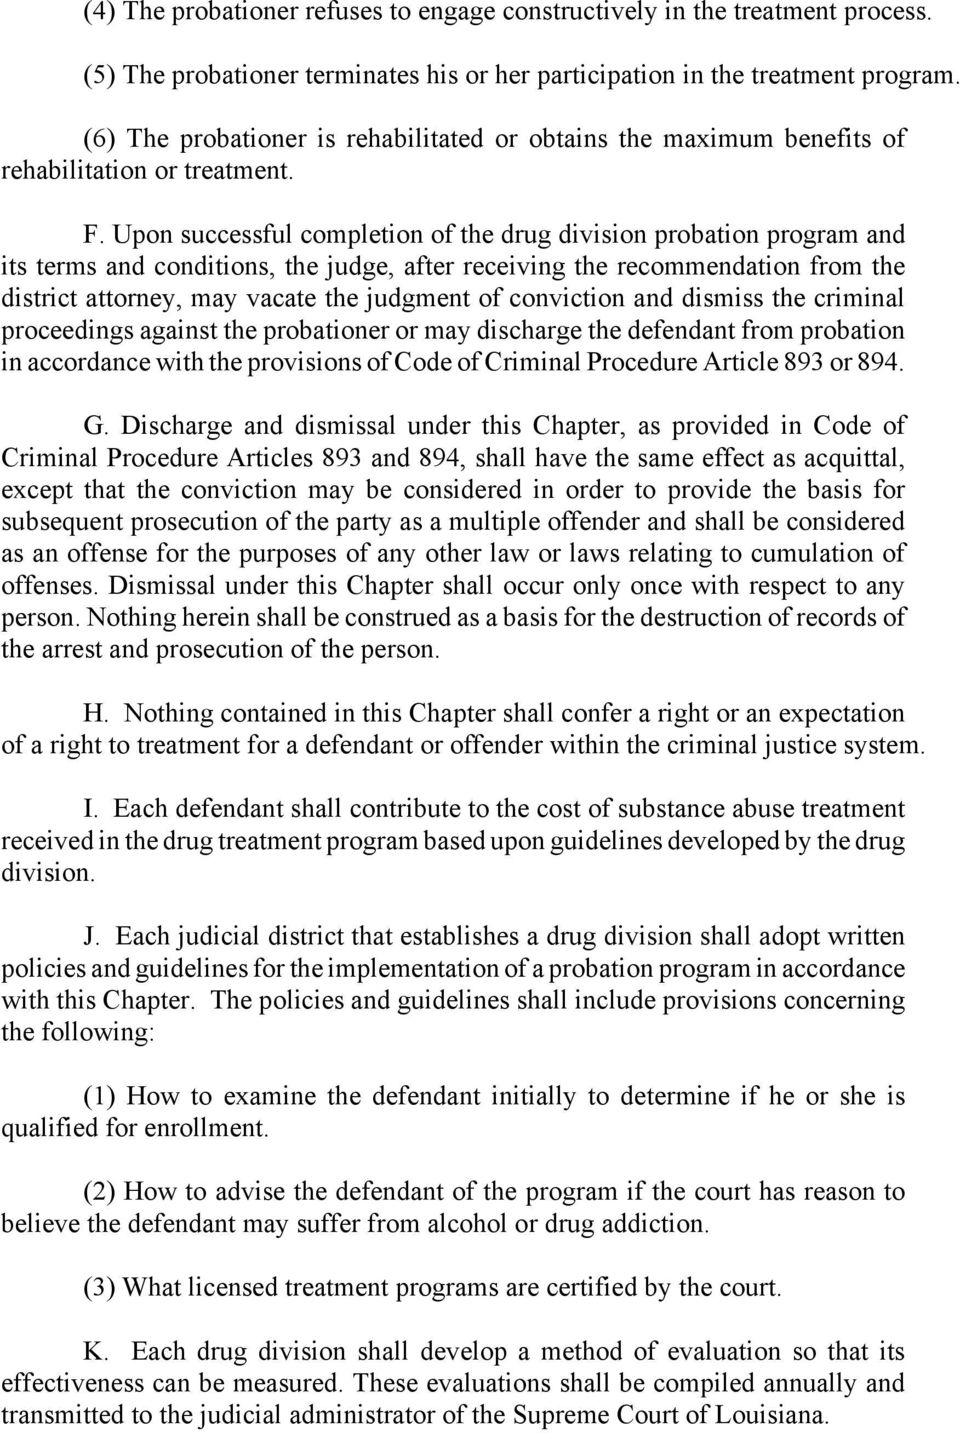 Upon successful completion of the drug division probation program and its terms and conditions, the judge, after receiving the recommendation from the district attorney, may vacate the judgment of